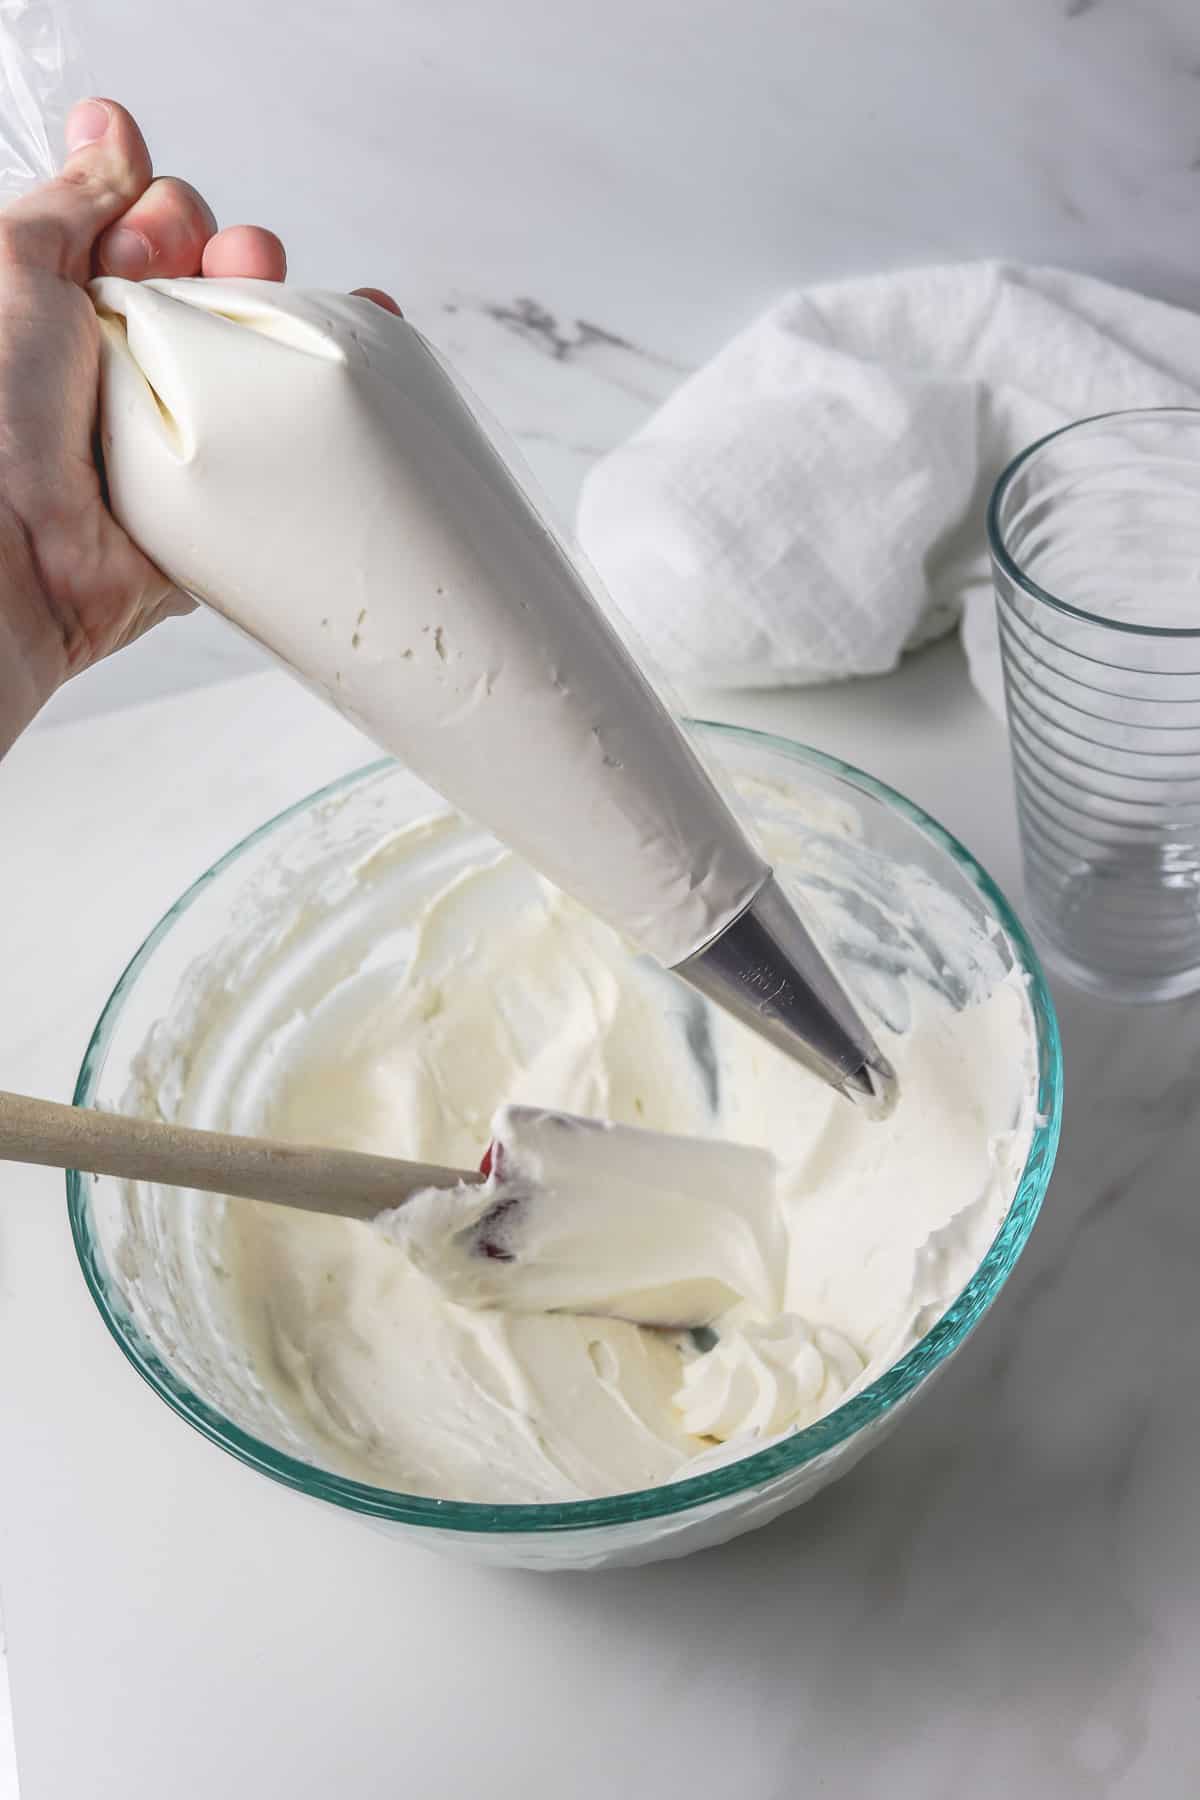 sugar-free whipped frosting filled in piping bag